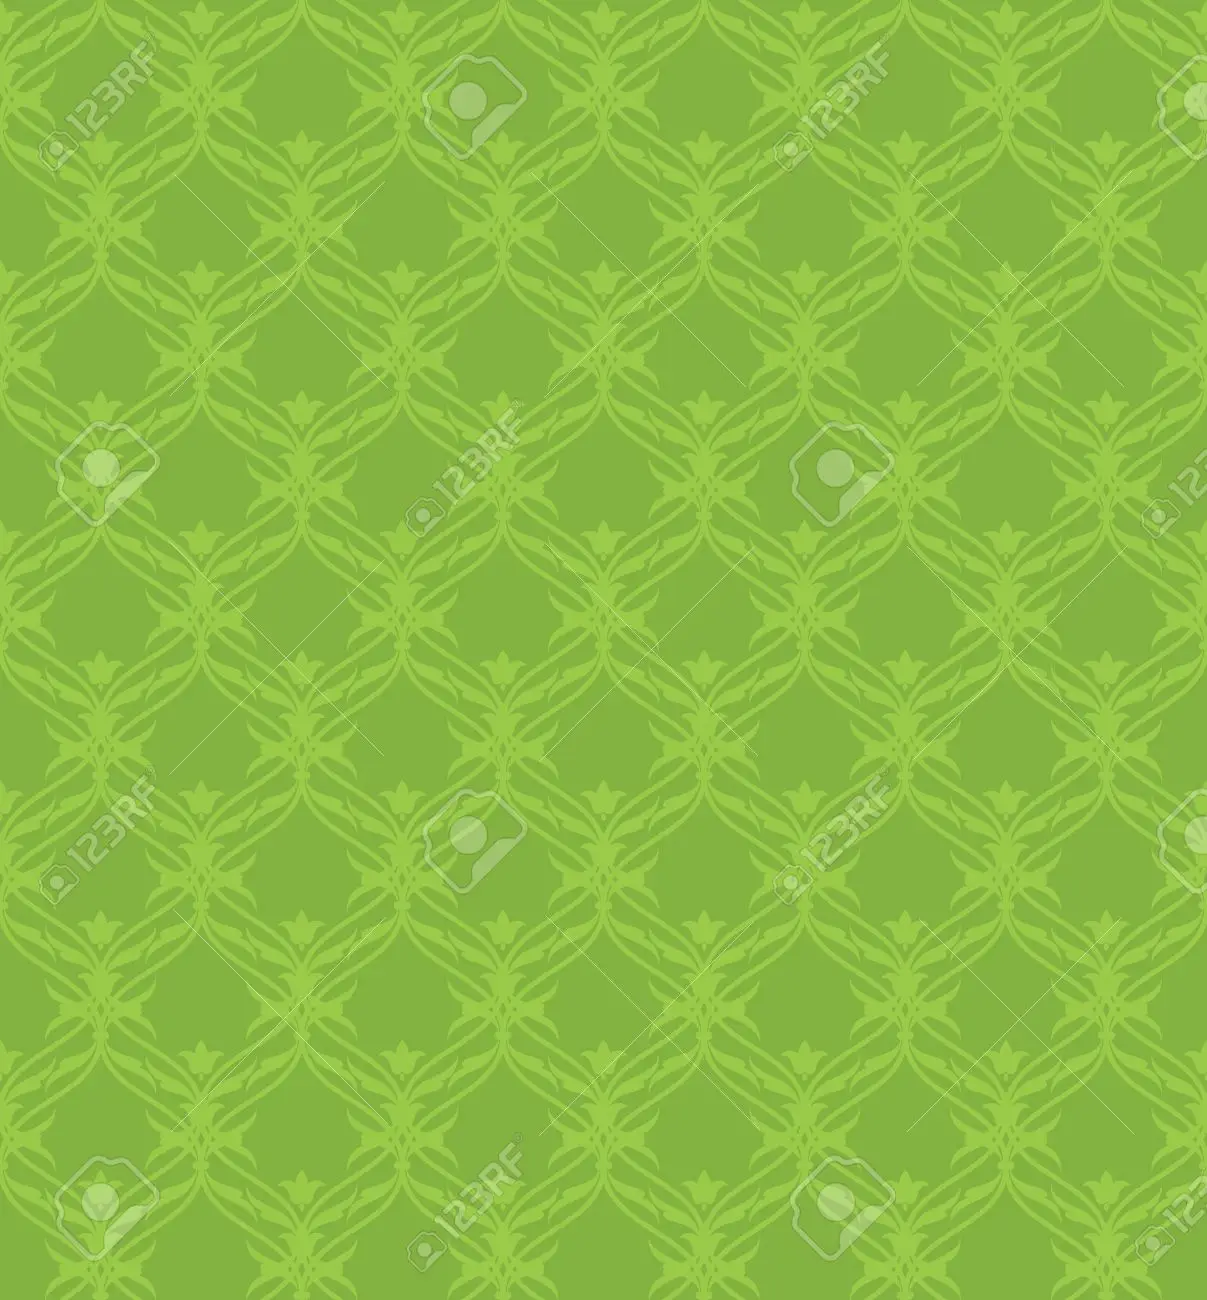 Light Green Canvas Fabric Texture Picture, Free Photograph